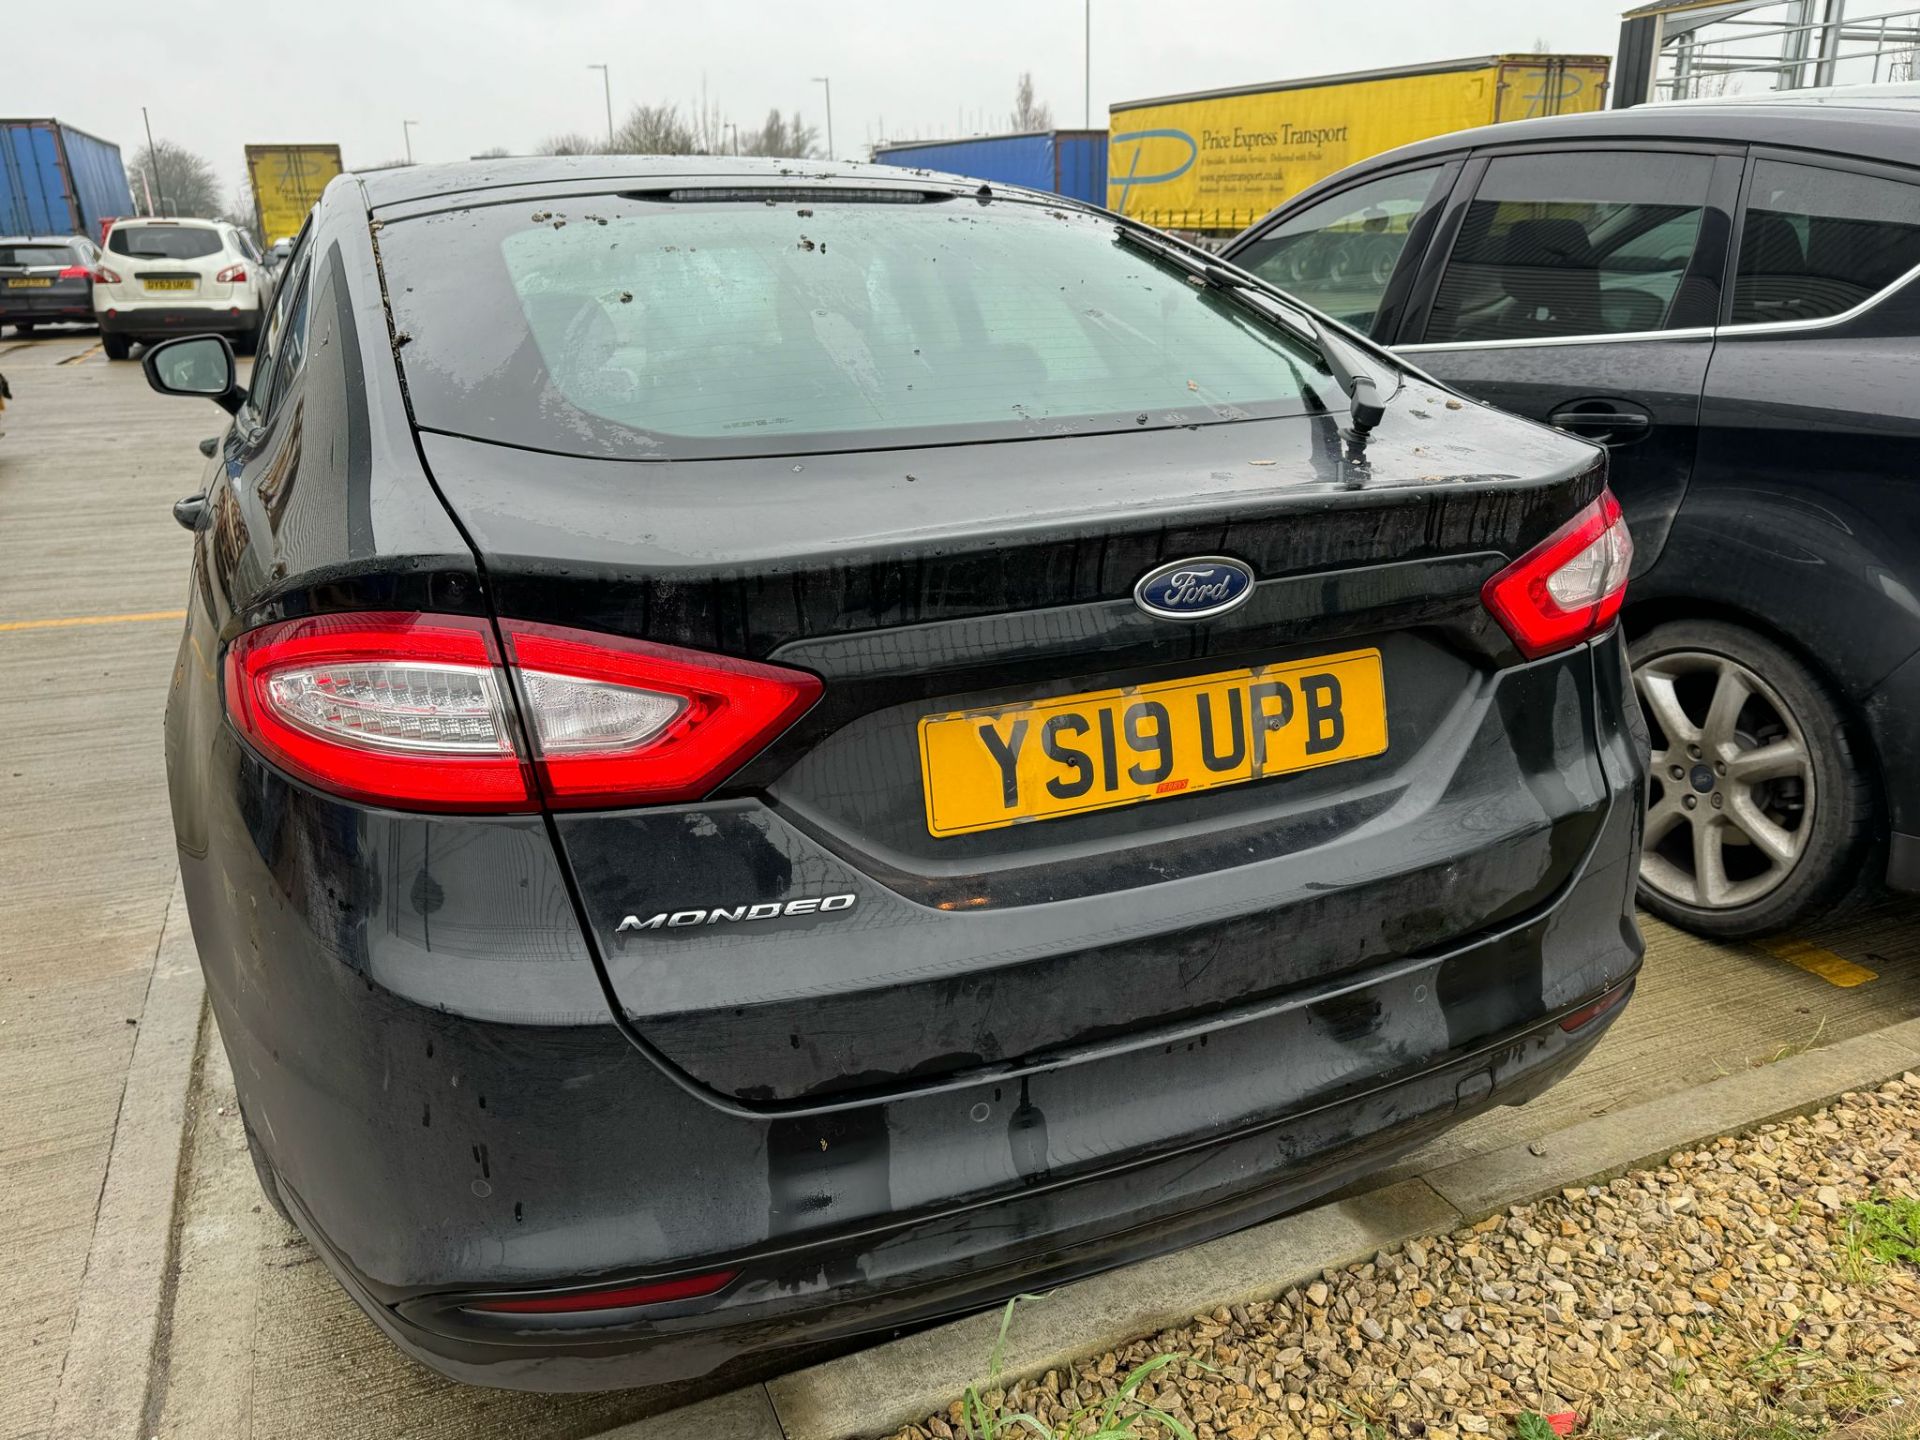 NO RESERVE - 2019, FORD Mondeo (Ex-Fleet Vehicle) - Image 8 of 19